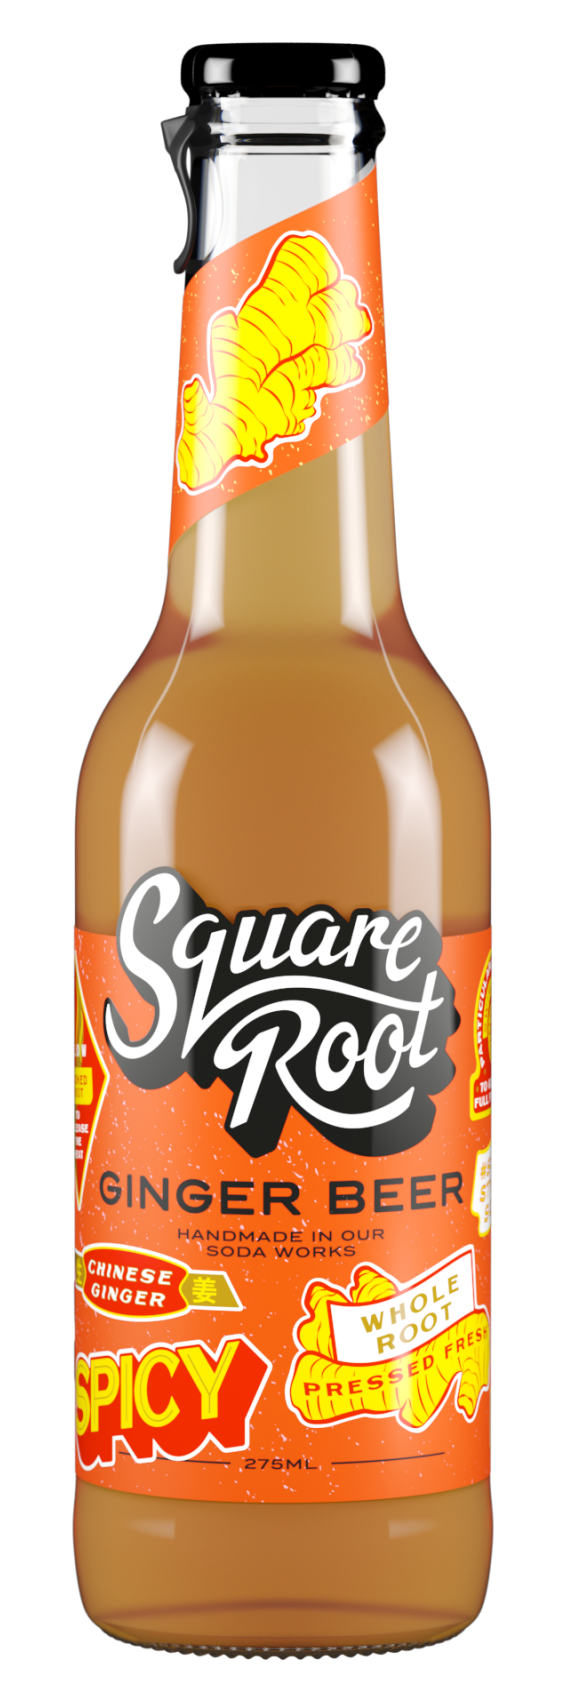 ALL THINGS DRINKS - Square root Ginger Beer